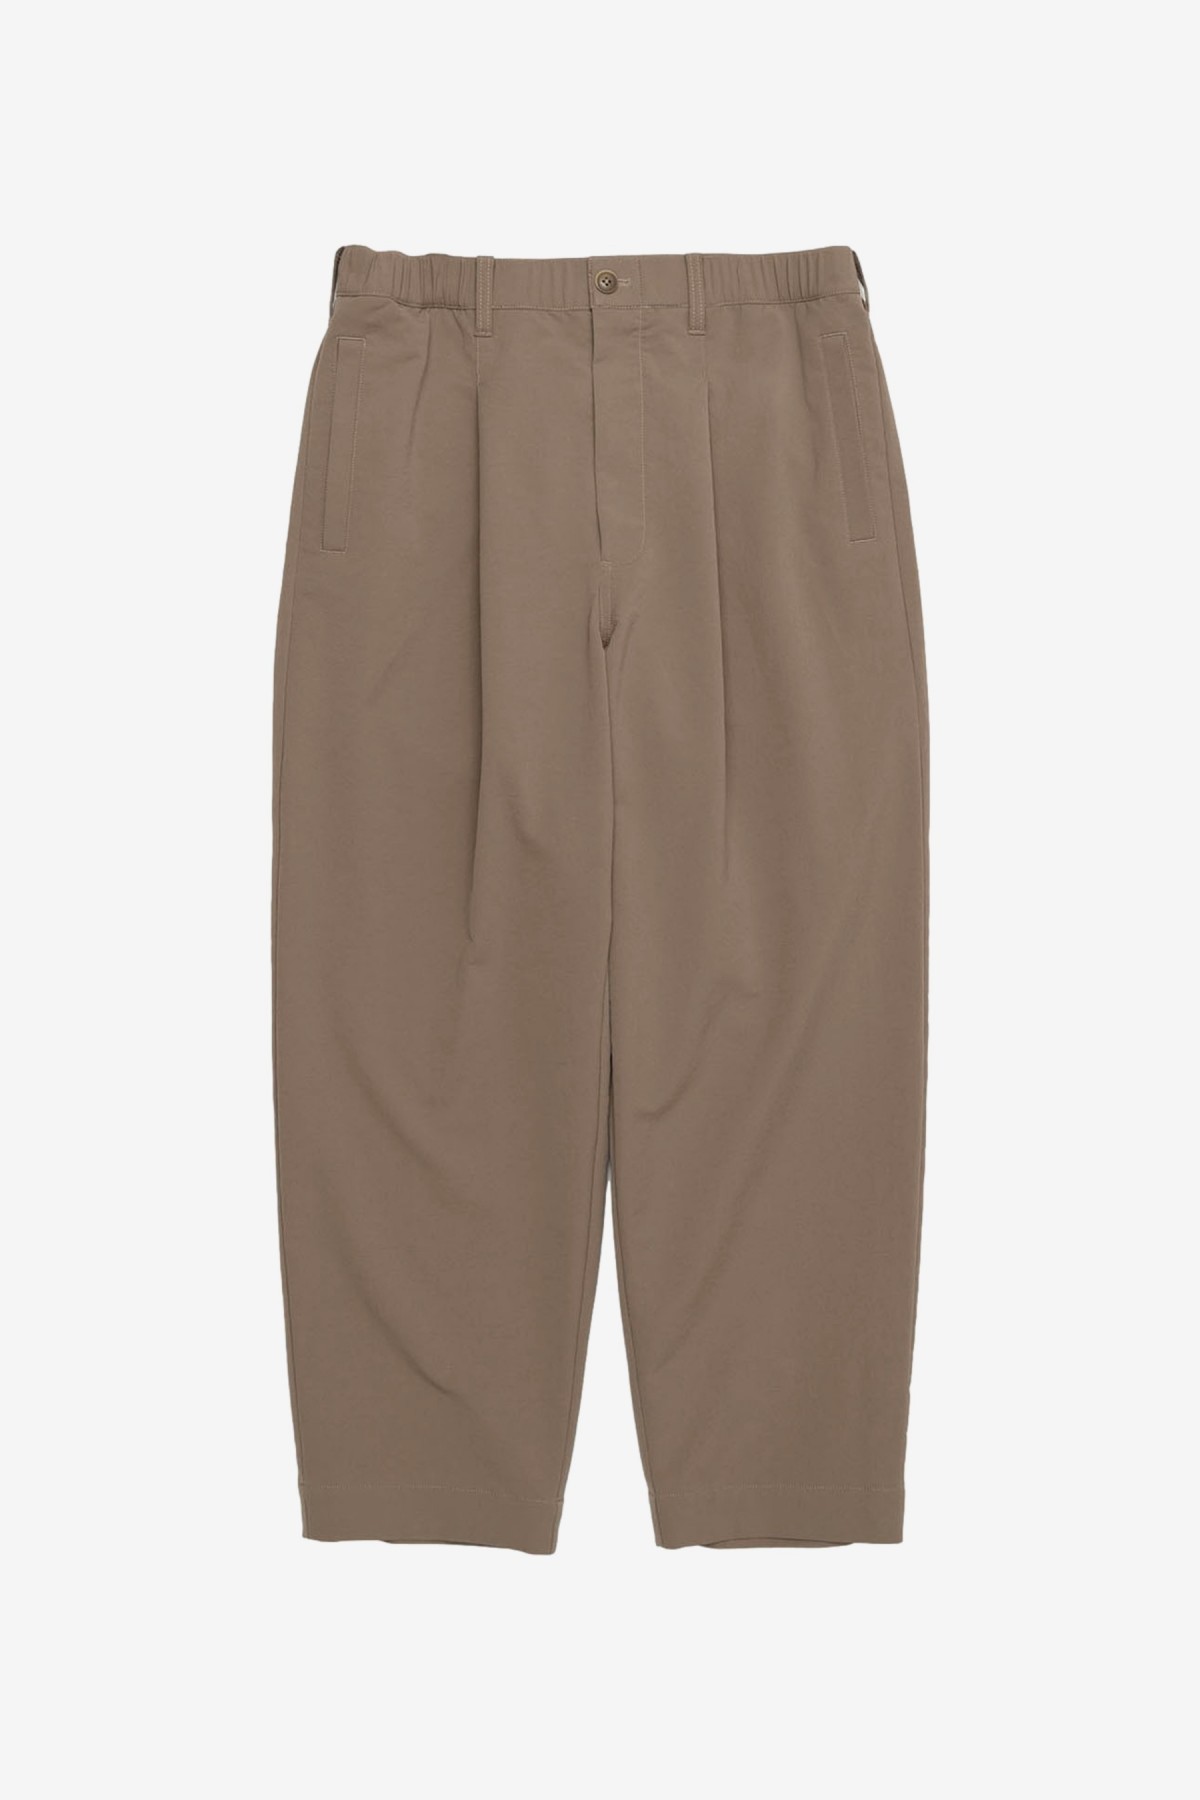 Nanamíca Alphadry Wide Pants in Taupe